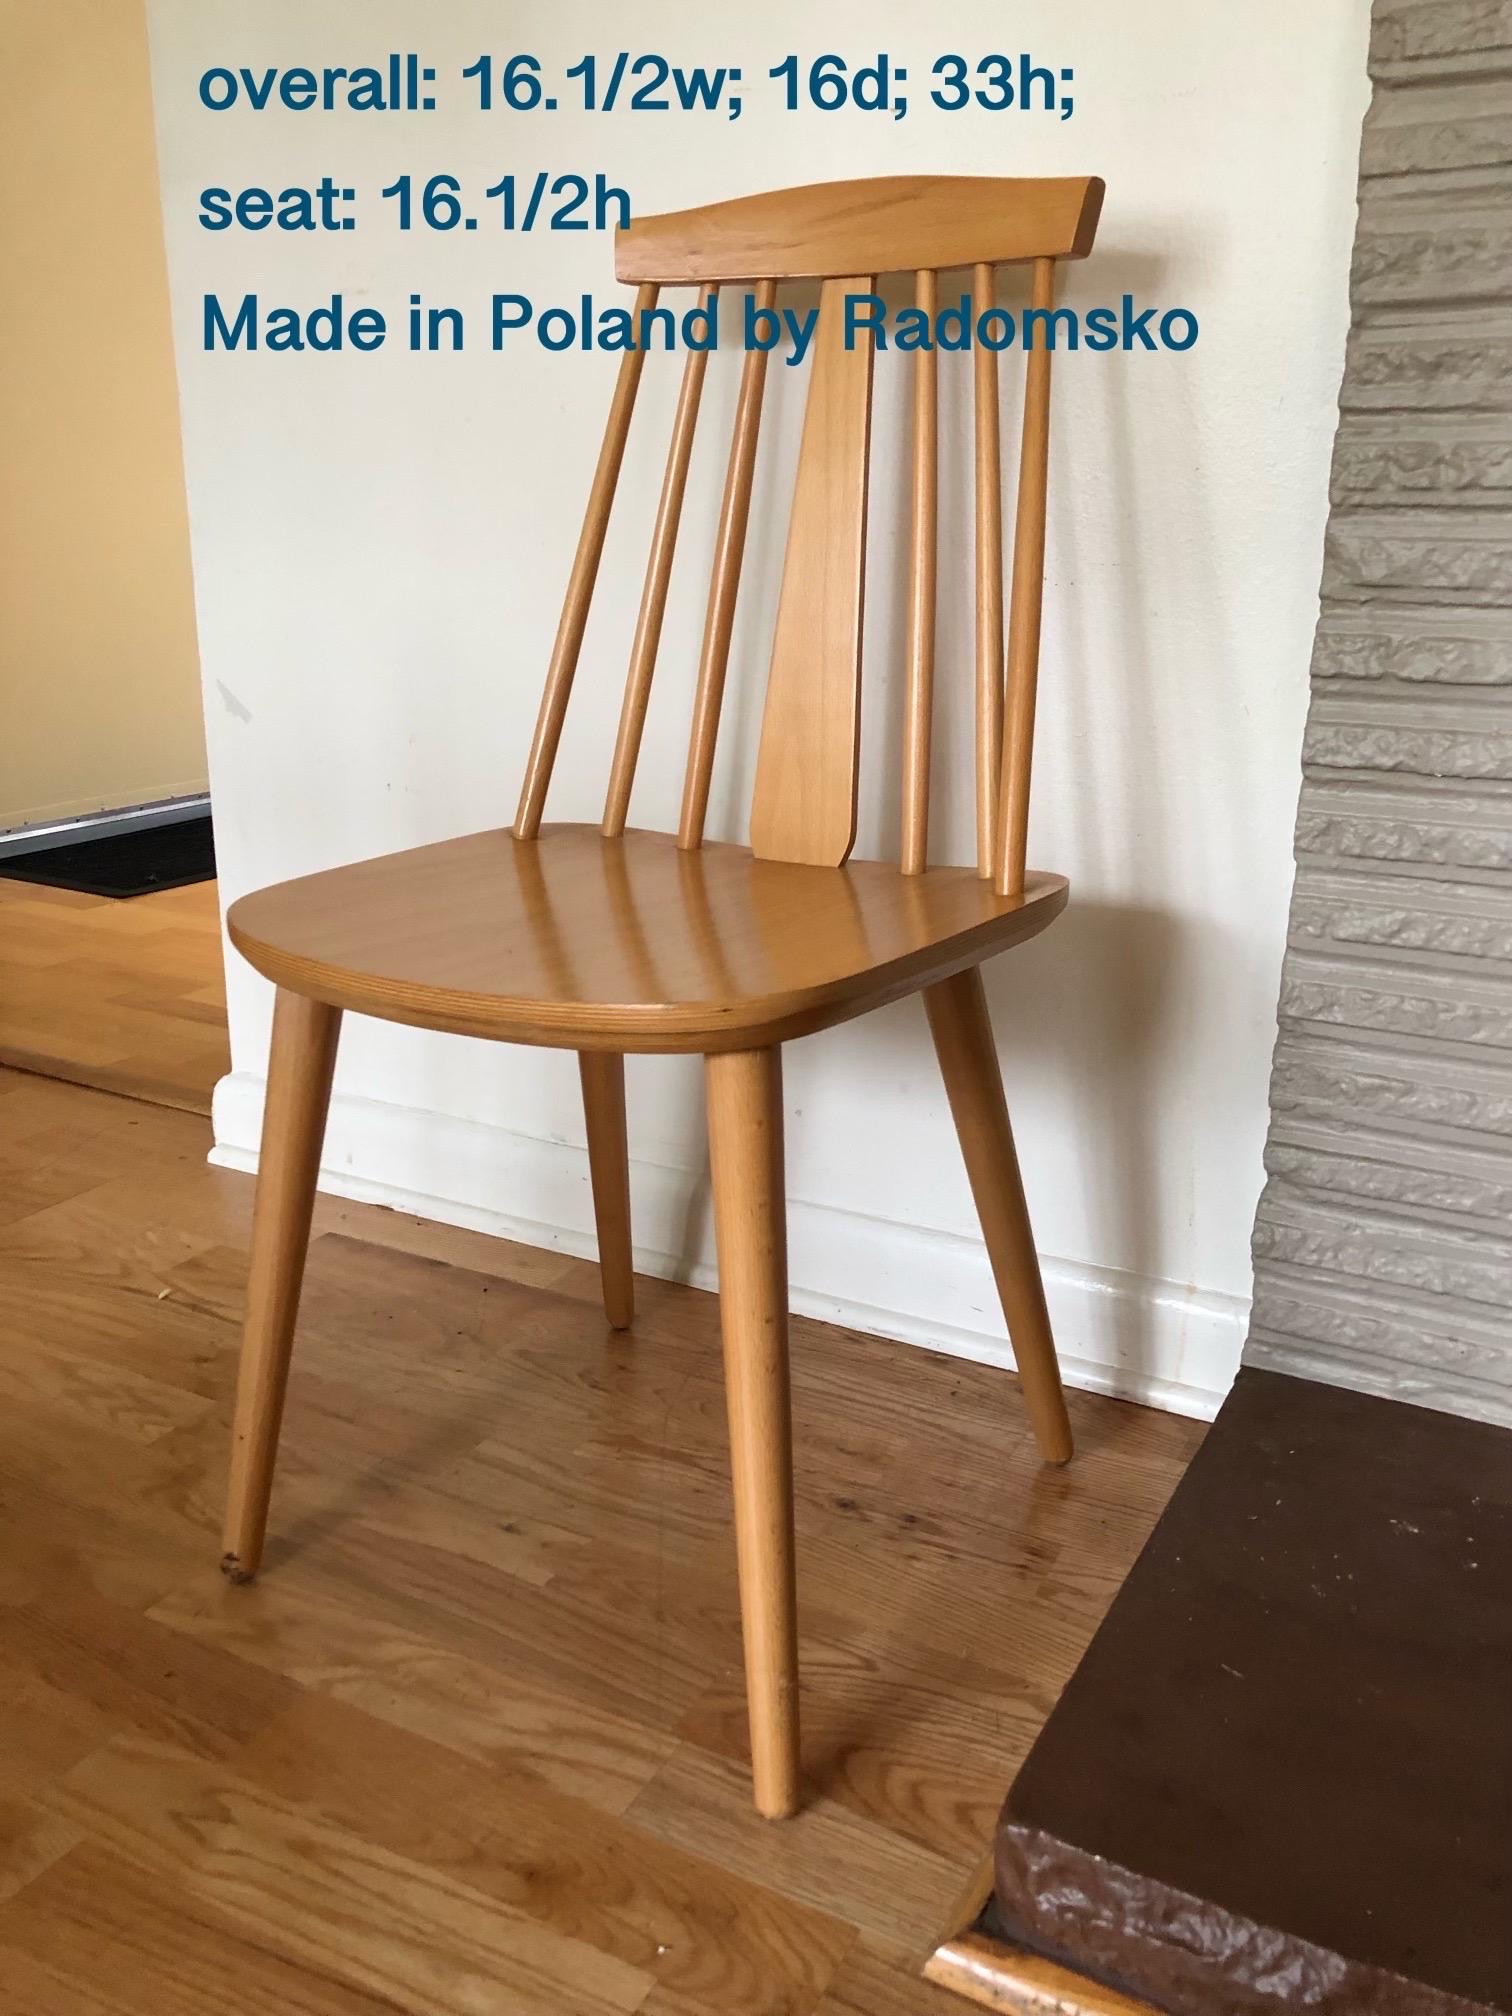 Late 20th Century Vintage Mid Century Modern Chair Made in by Poland Radomsko For Sale